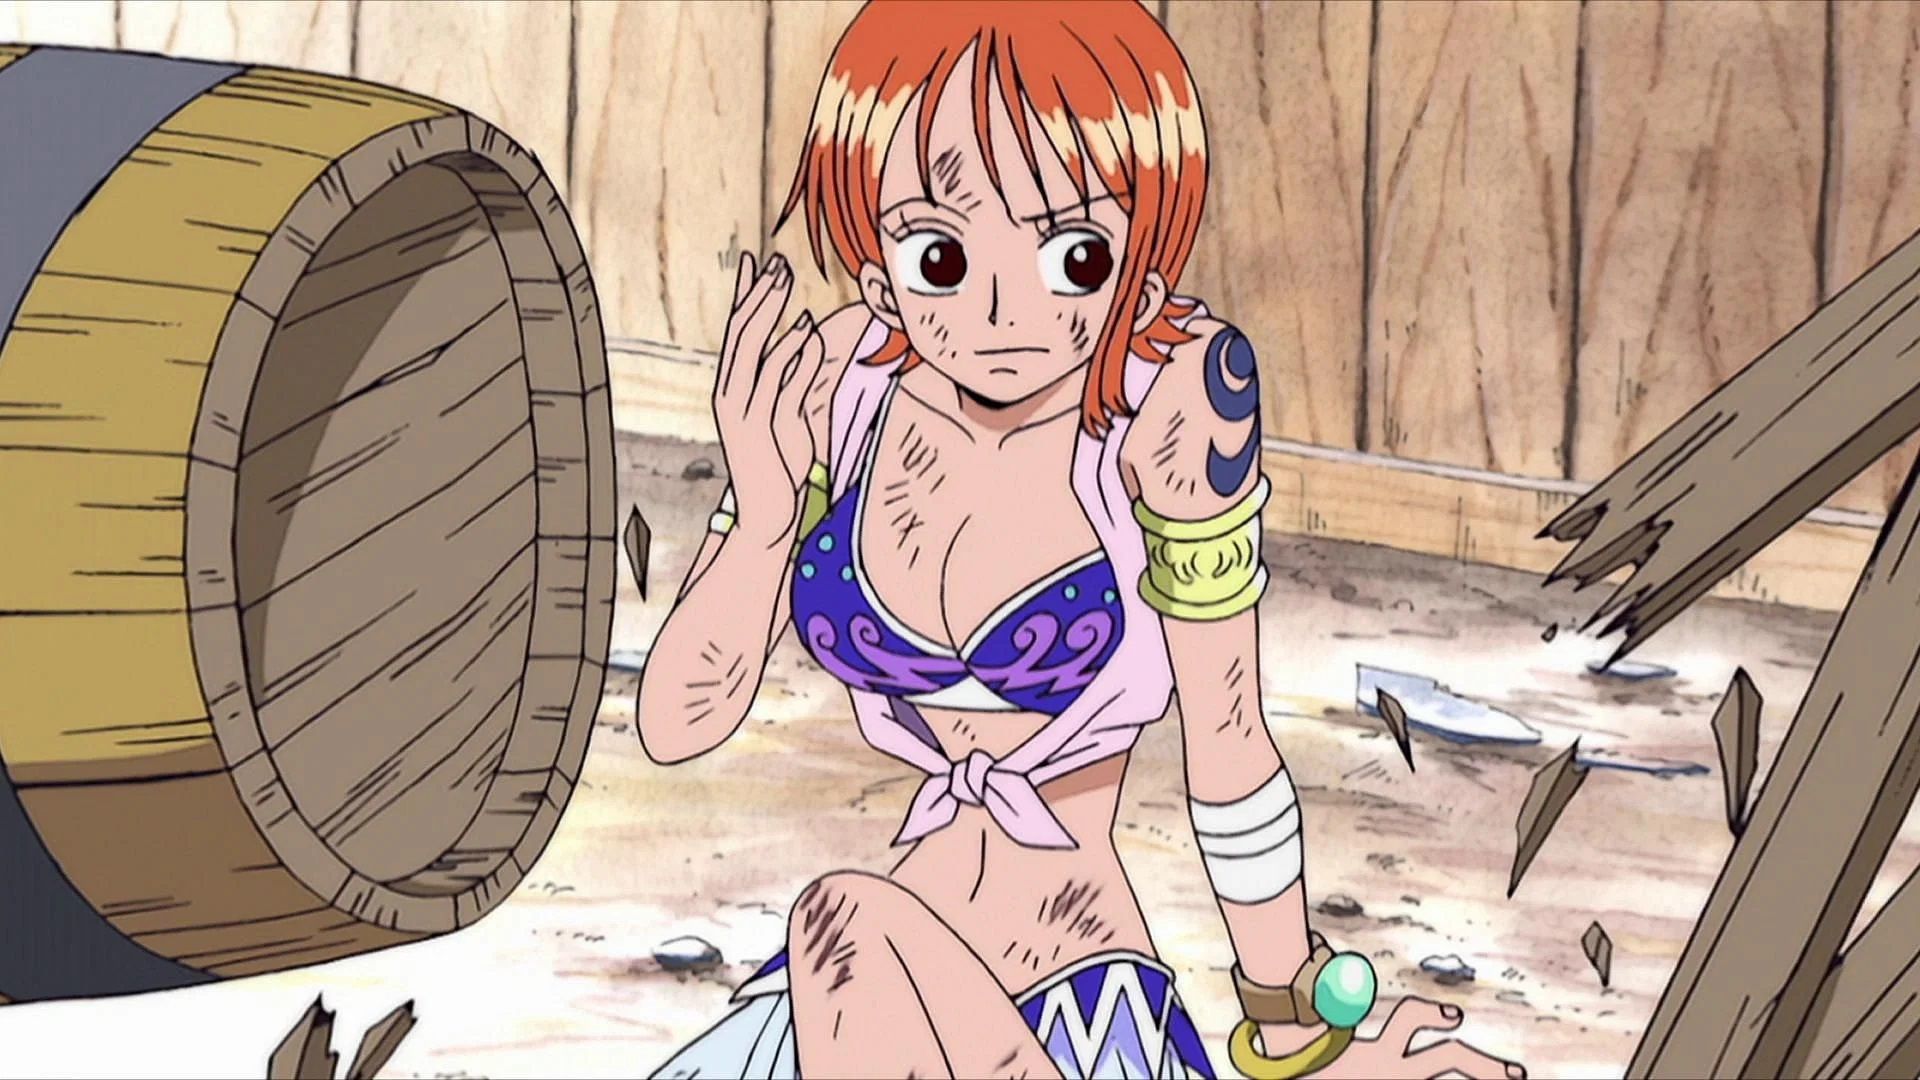 Nami sits on the street next to a barrel